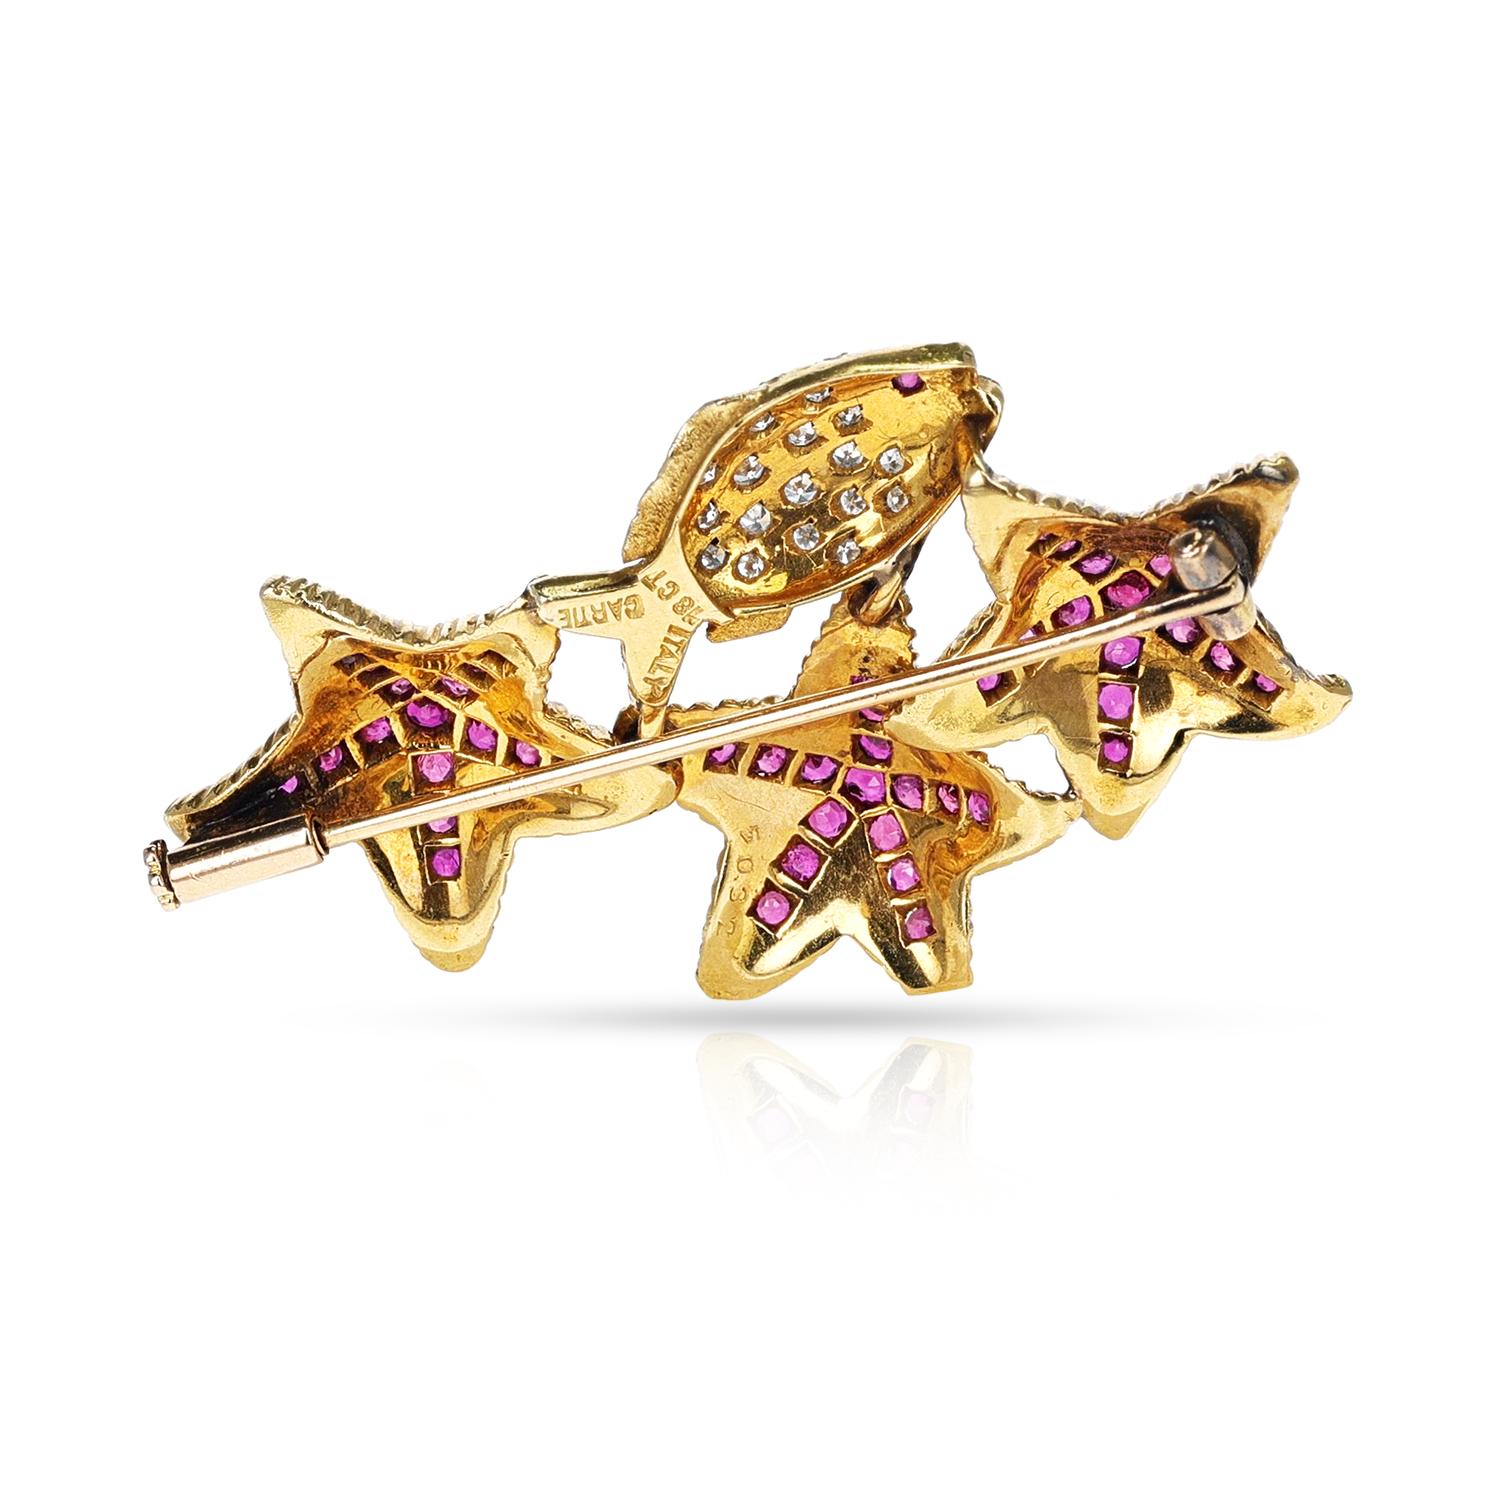 A Cartier Italy Ruby and Diamond Fish and Starfish Brooch/Pin made in 18 Karat Yellow Gold. The length is appx 5 x 3 CM. 